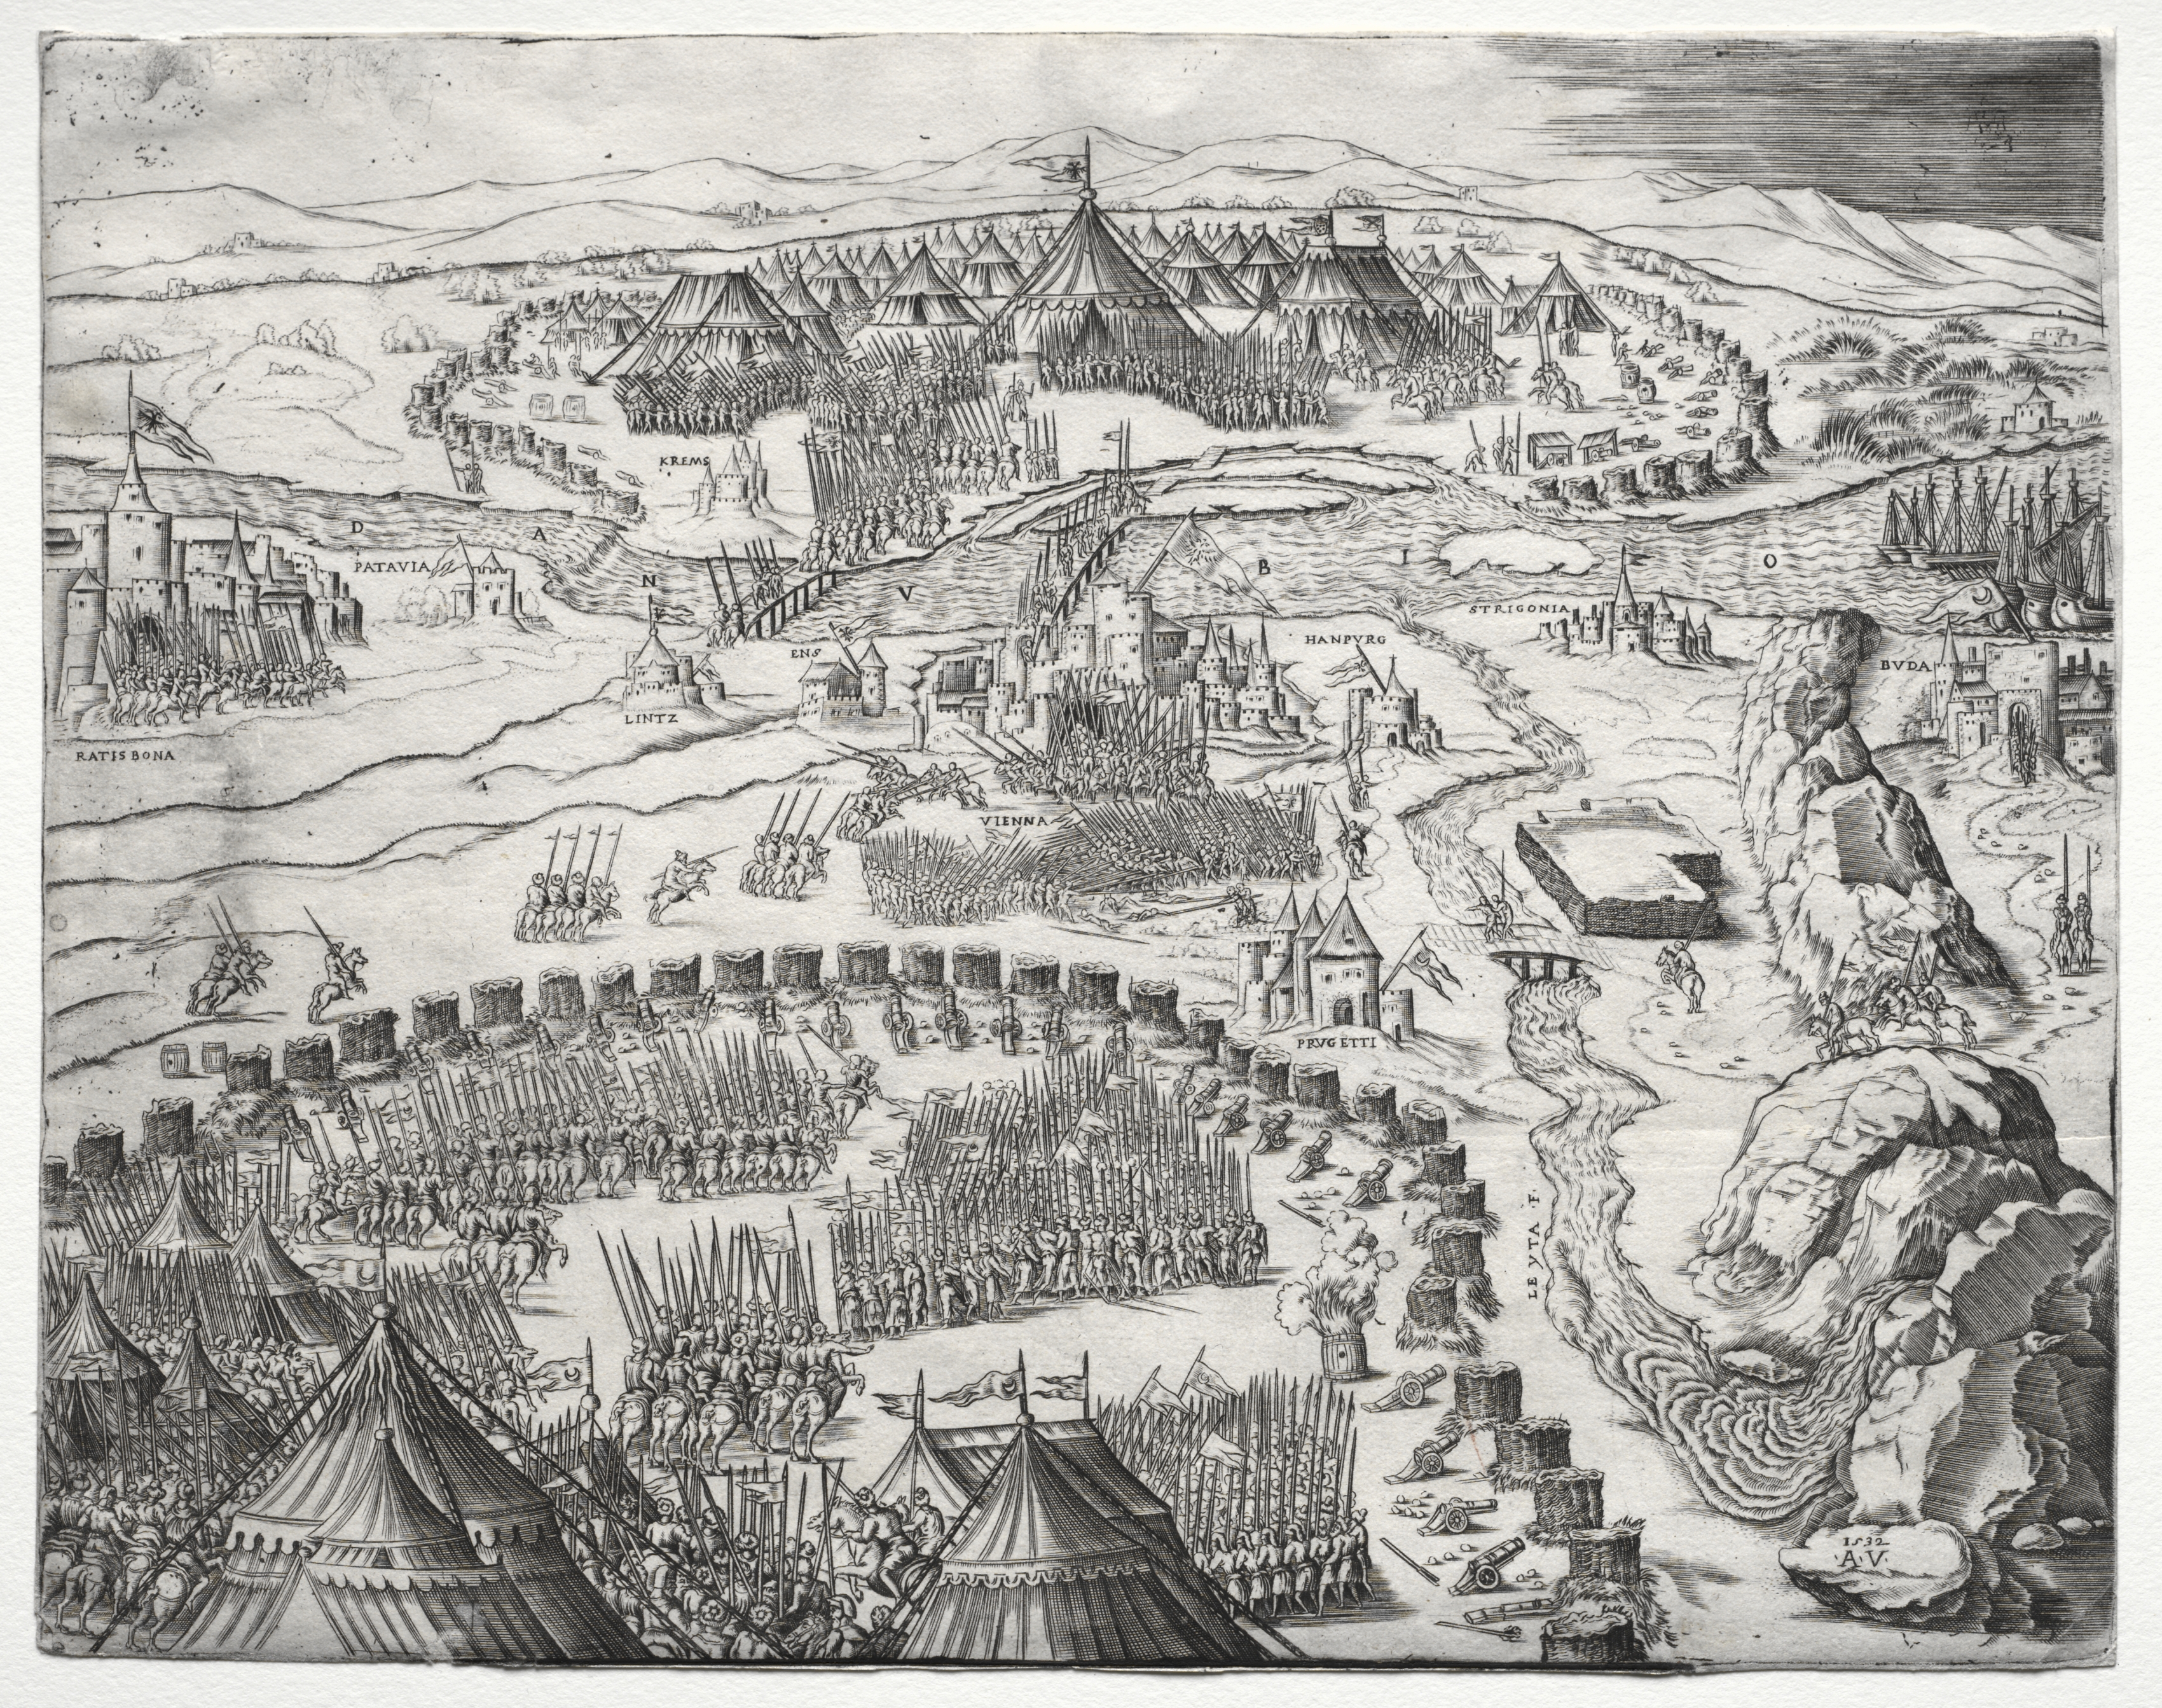 The Position and Camp of the Armies of Charles V and Soliman II